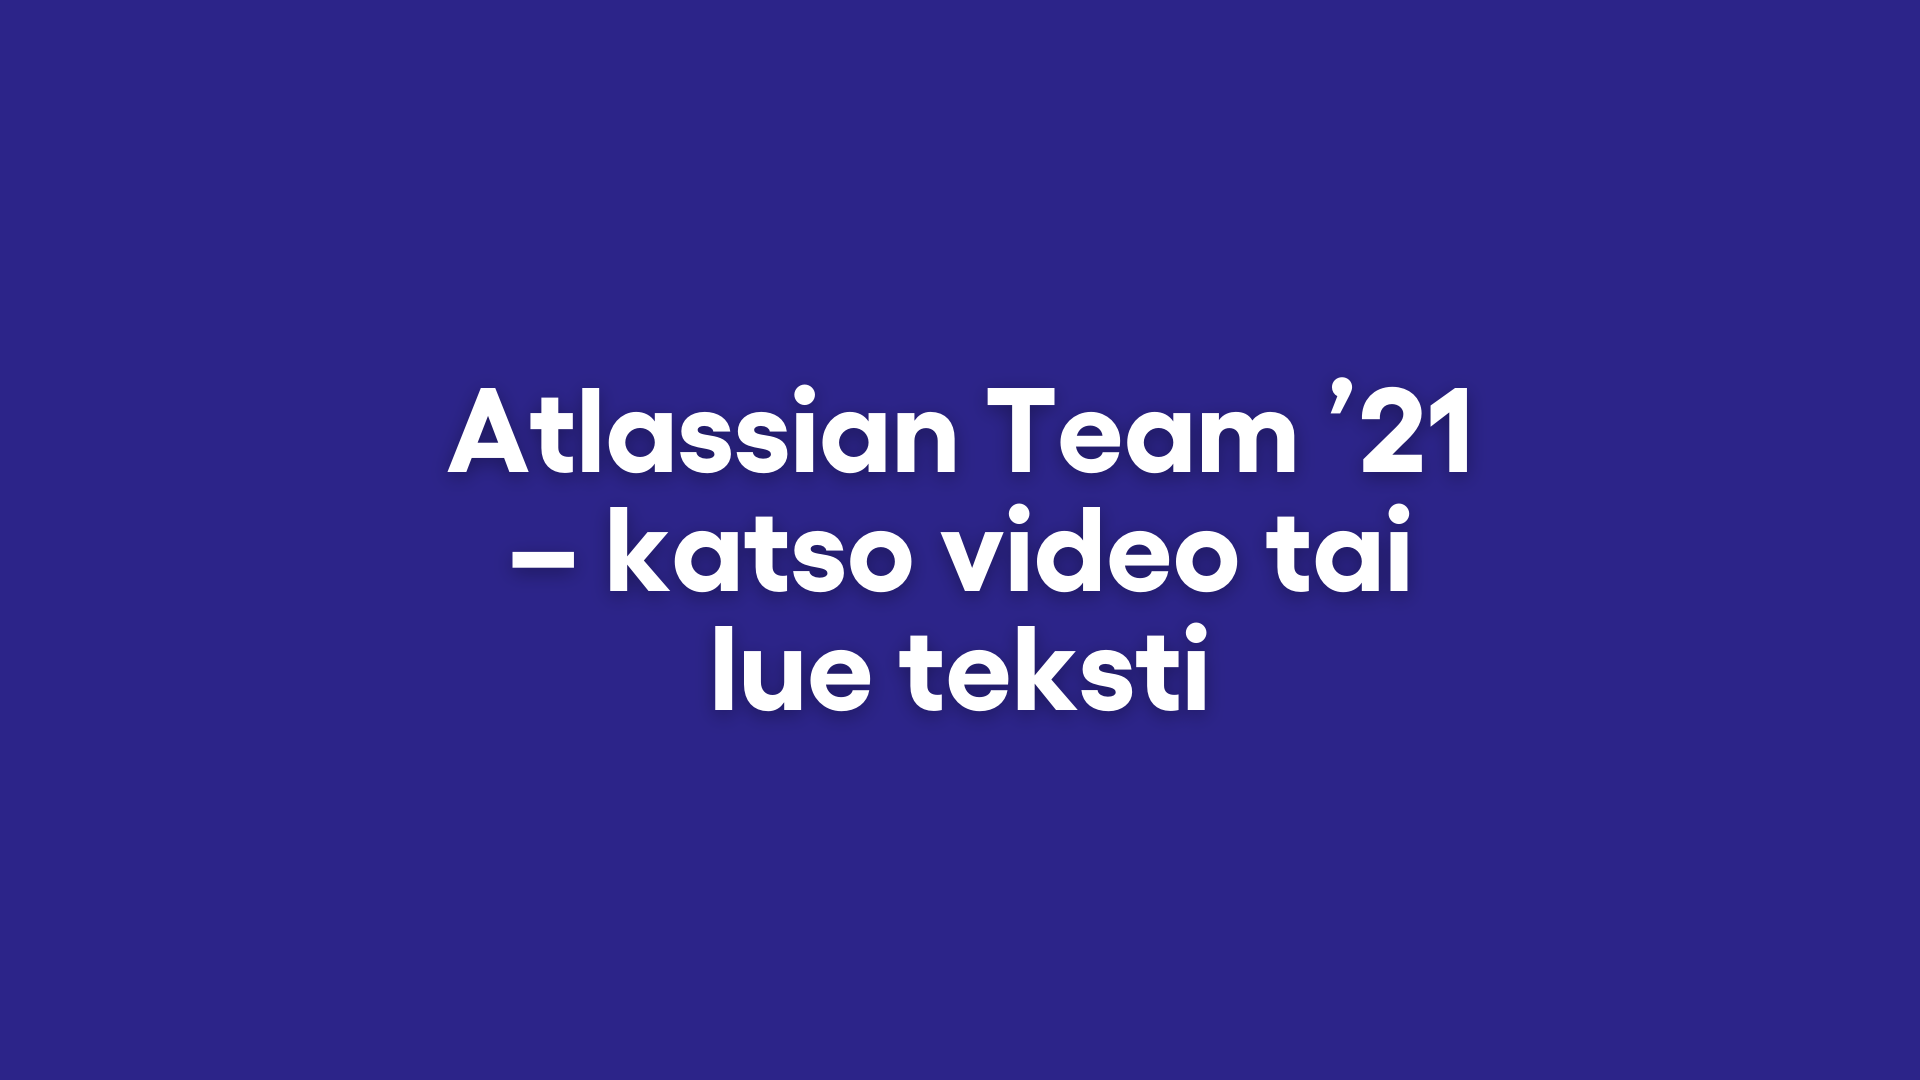 Atlassian Team ’21: Mission to Unleash the Potential of Every Team